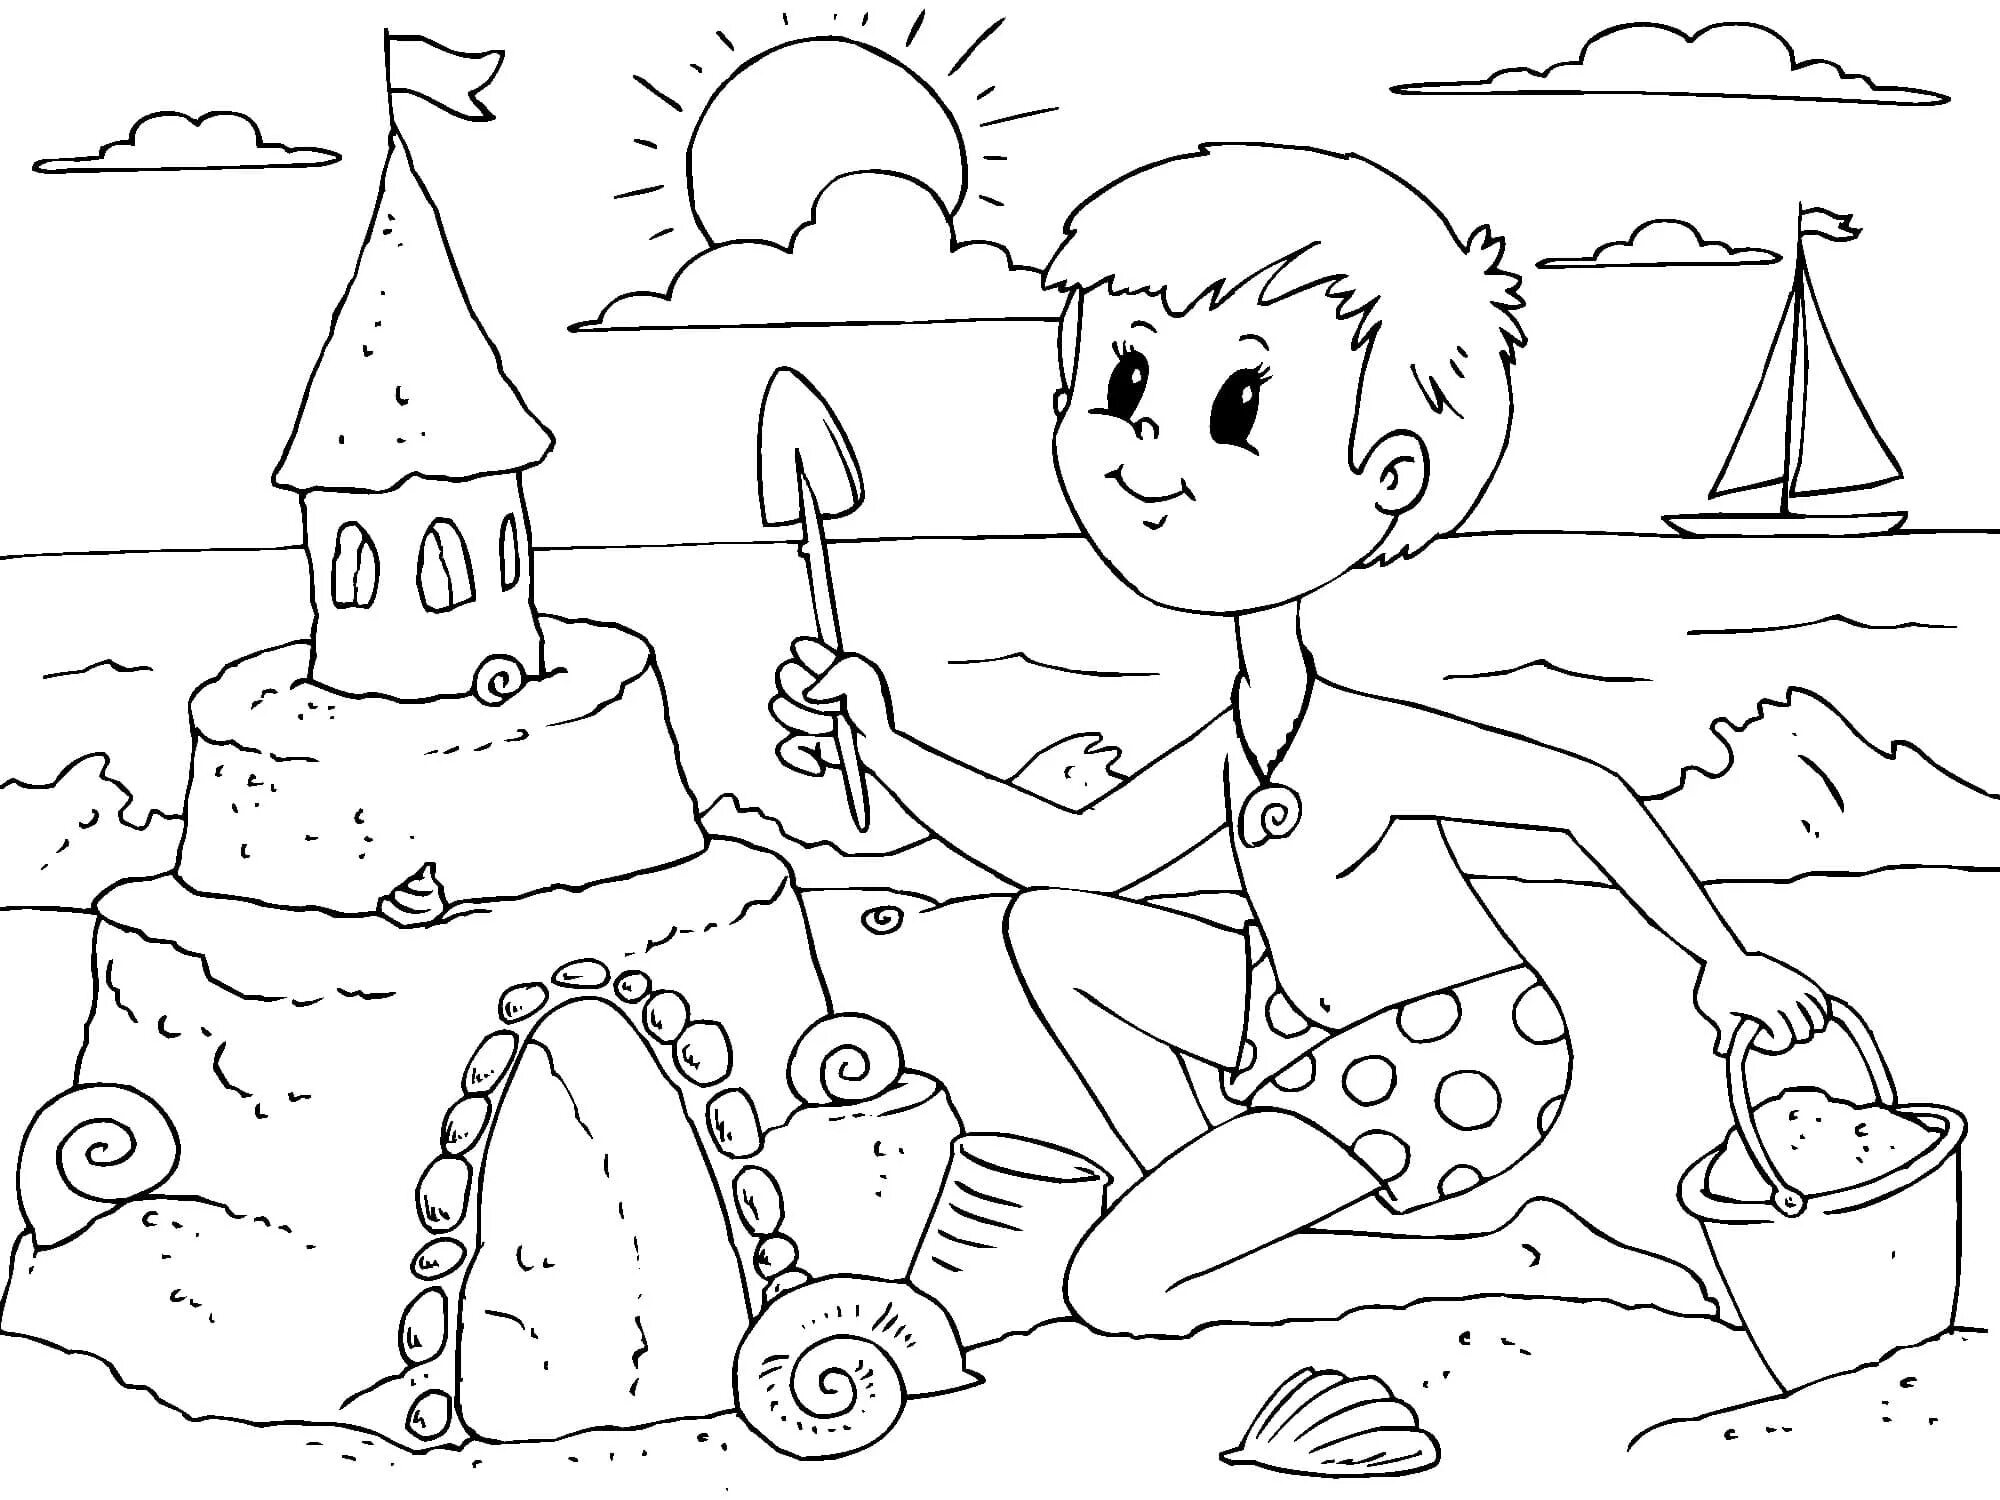 Great marine coloring book for 6-7 year olds